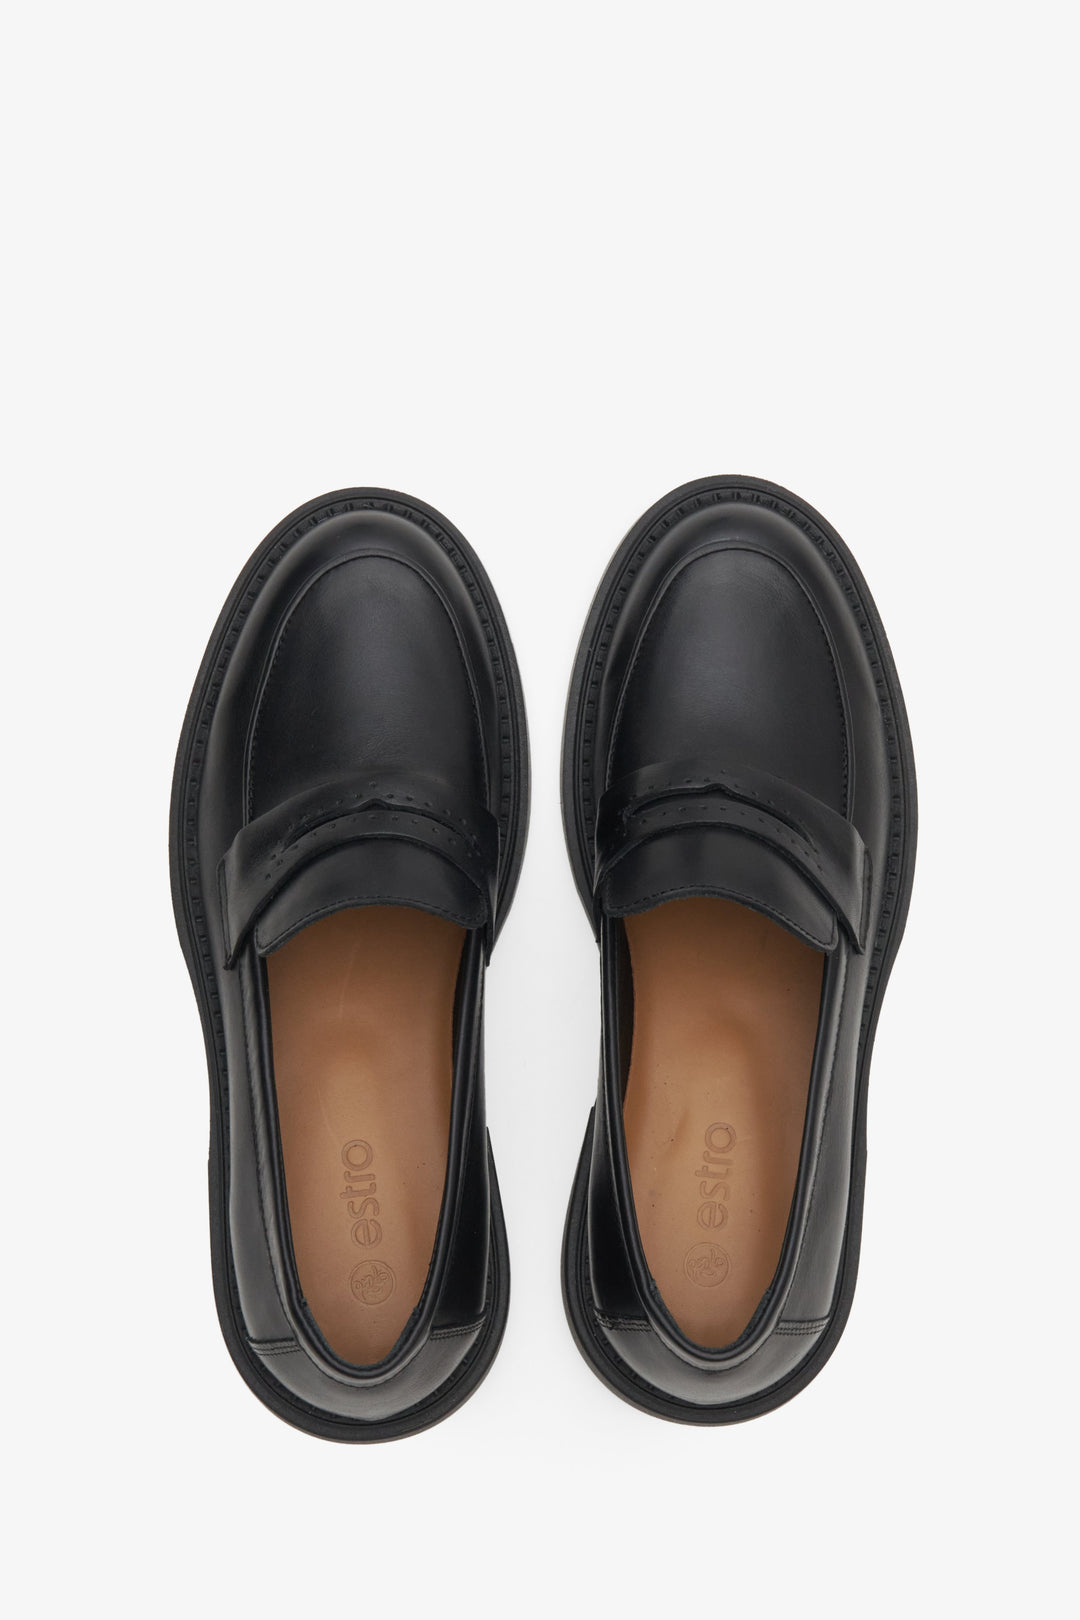 Estro women's black loafers made of genuine leather - top view presentation of the model.